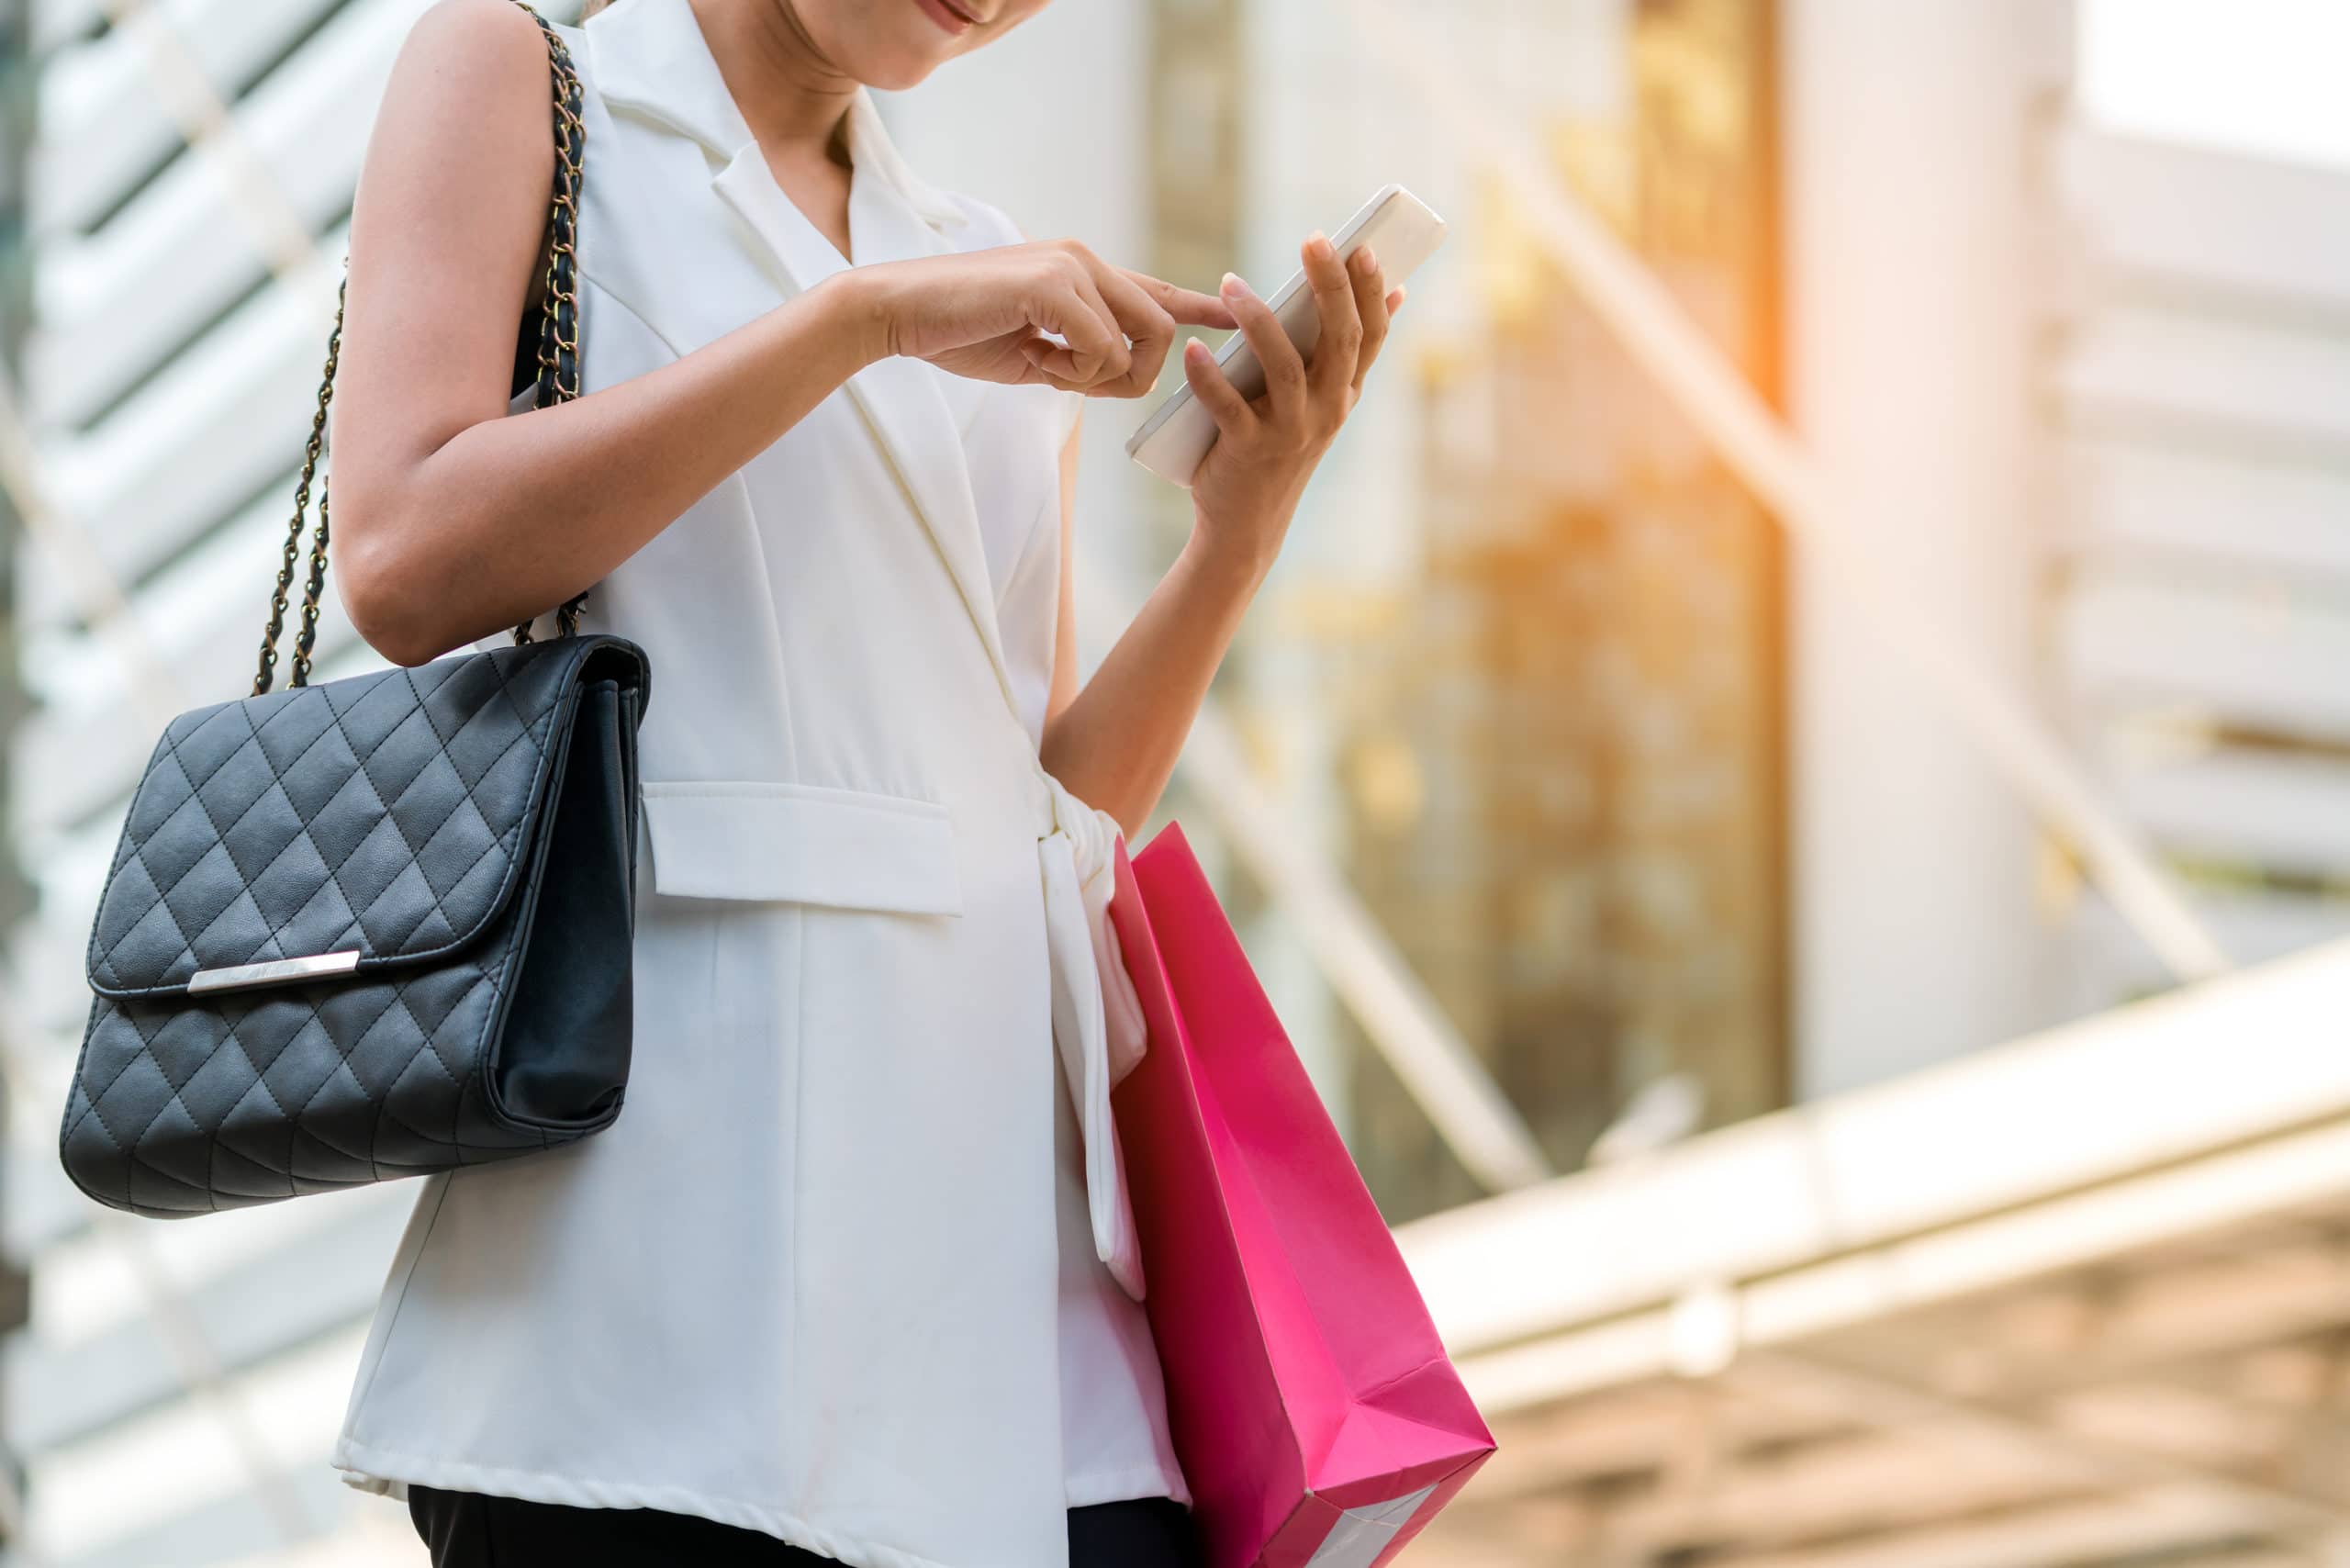 How shoppers are using mobile apps to shop in-store